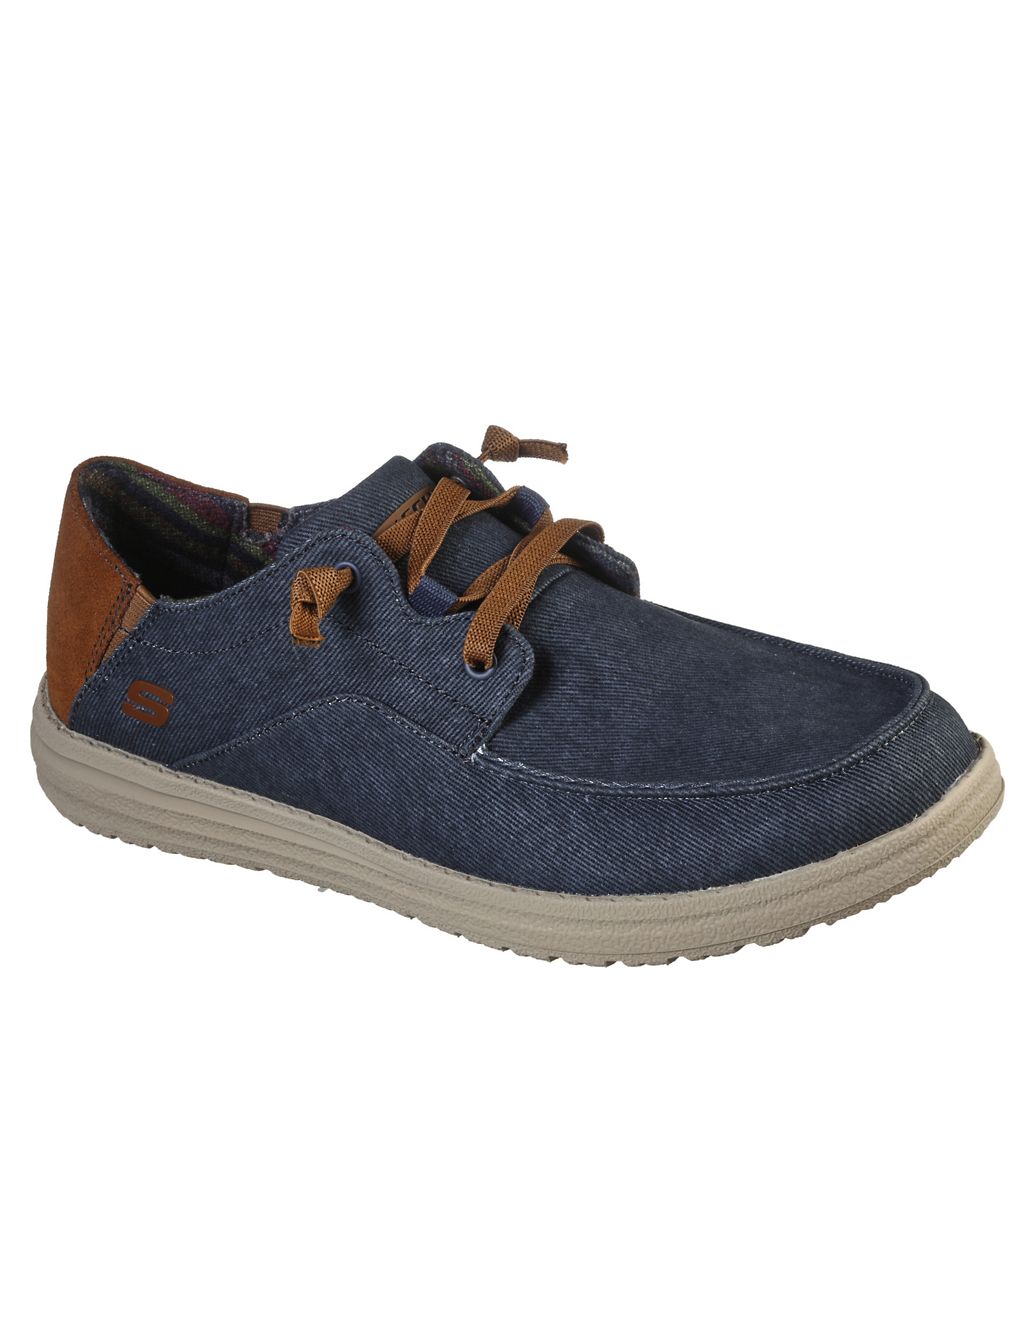 Melson Planon Boat Shoes 1 of 5